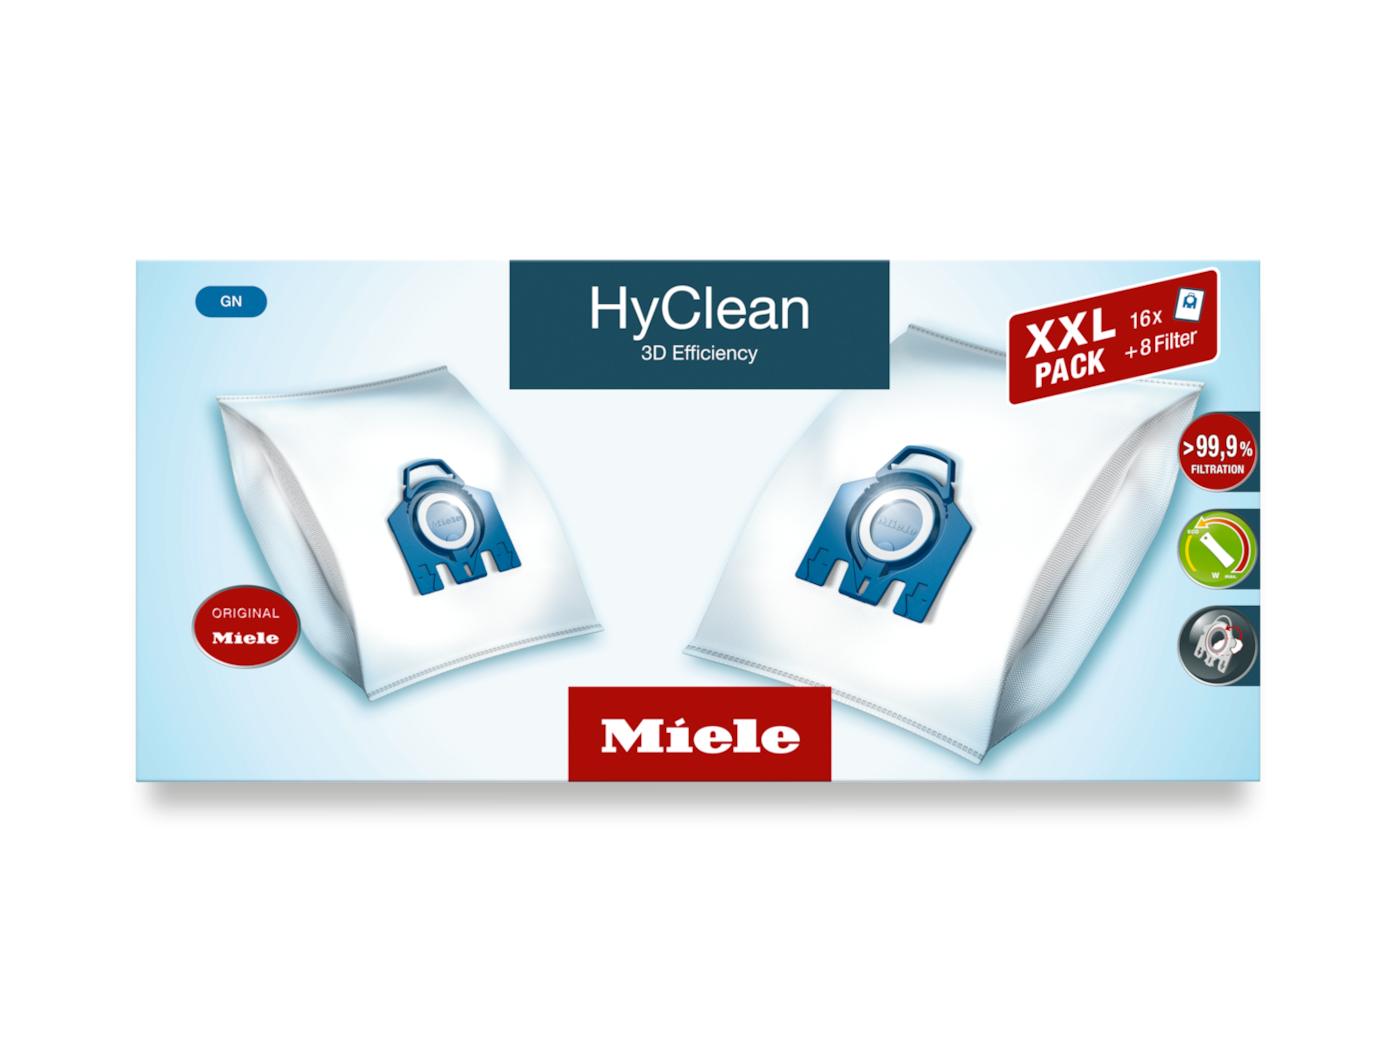 GN Hyclean 3D XXL Pack product photo